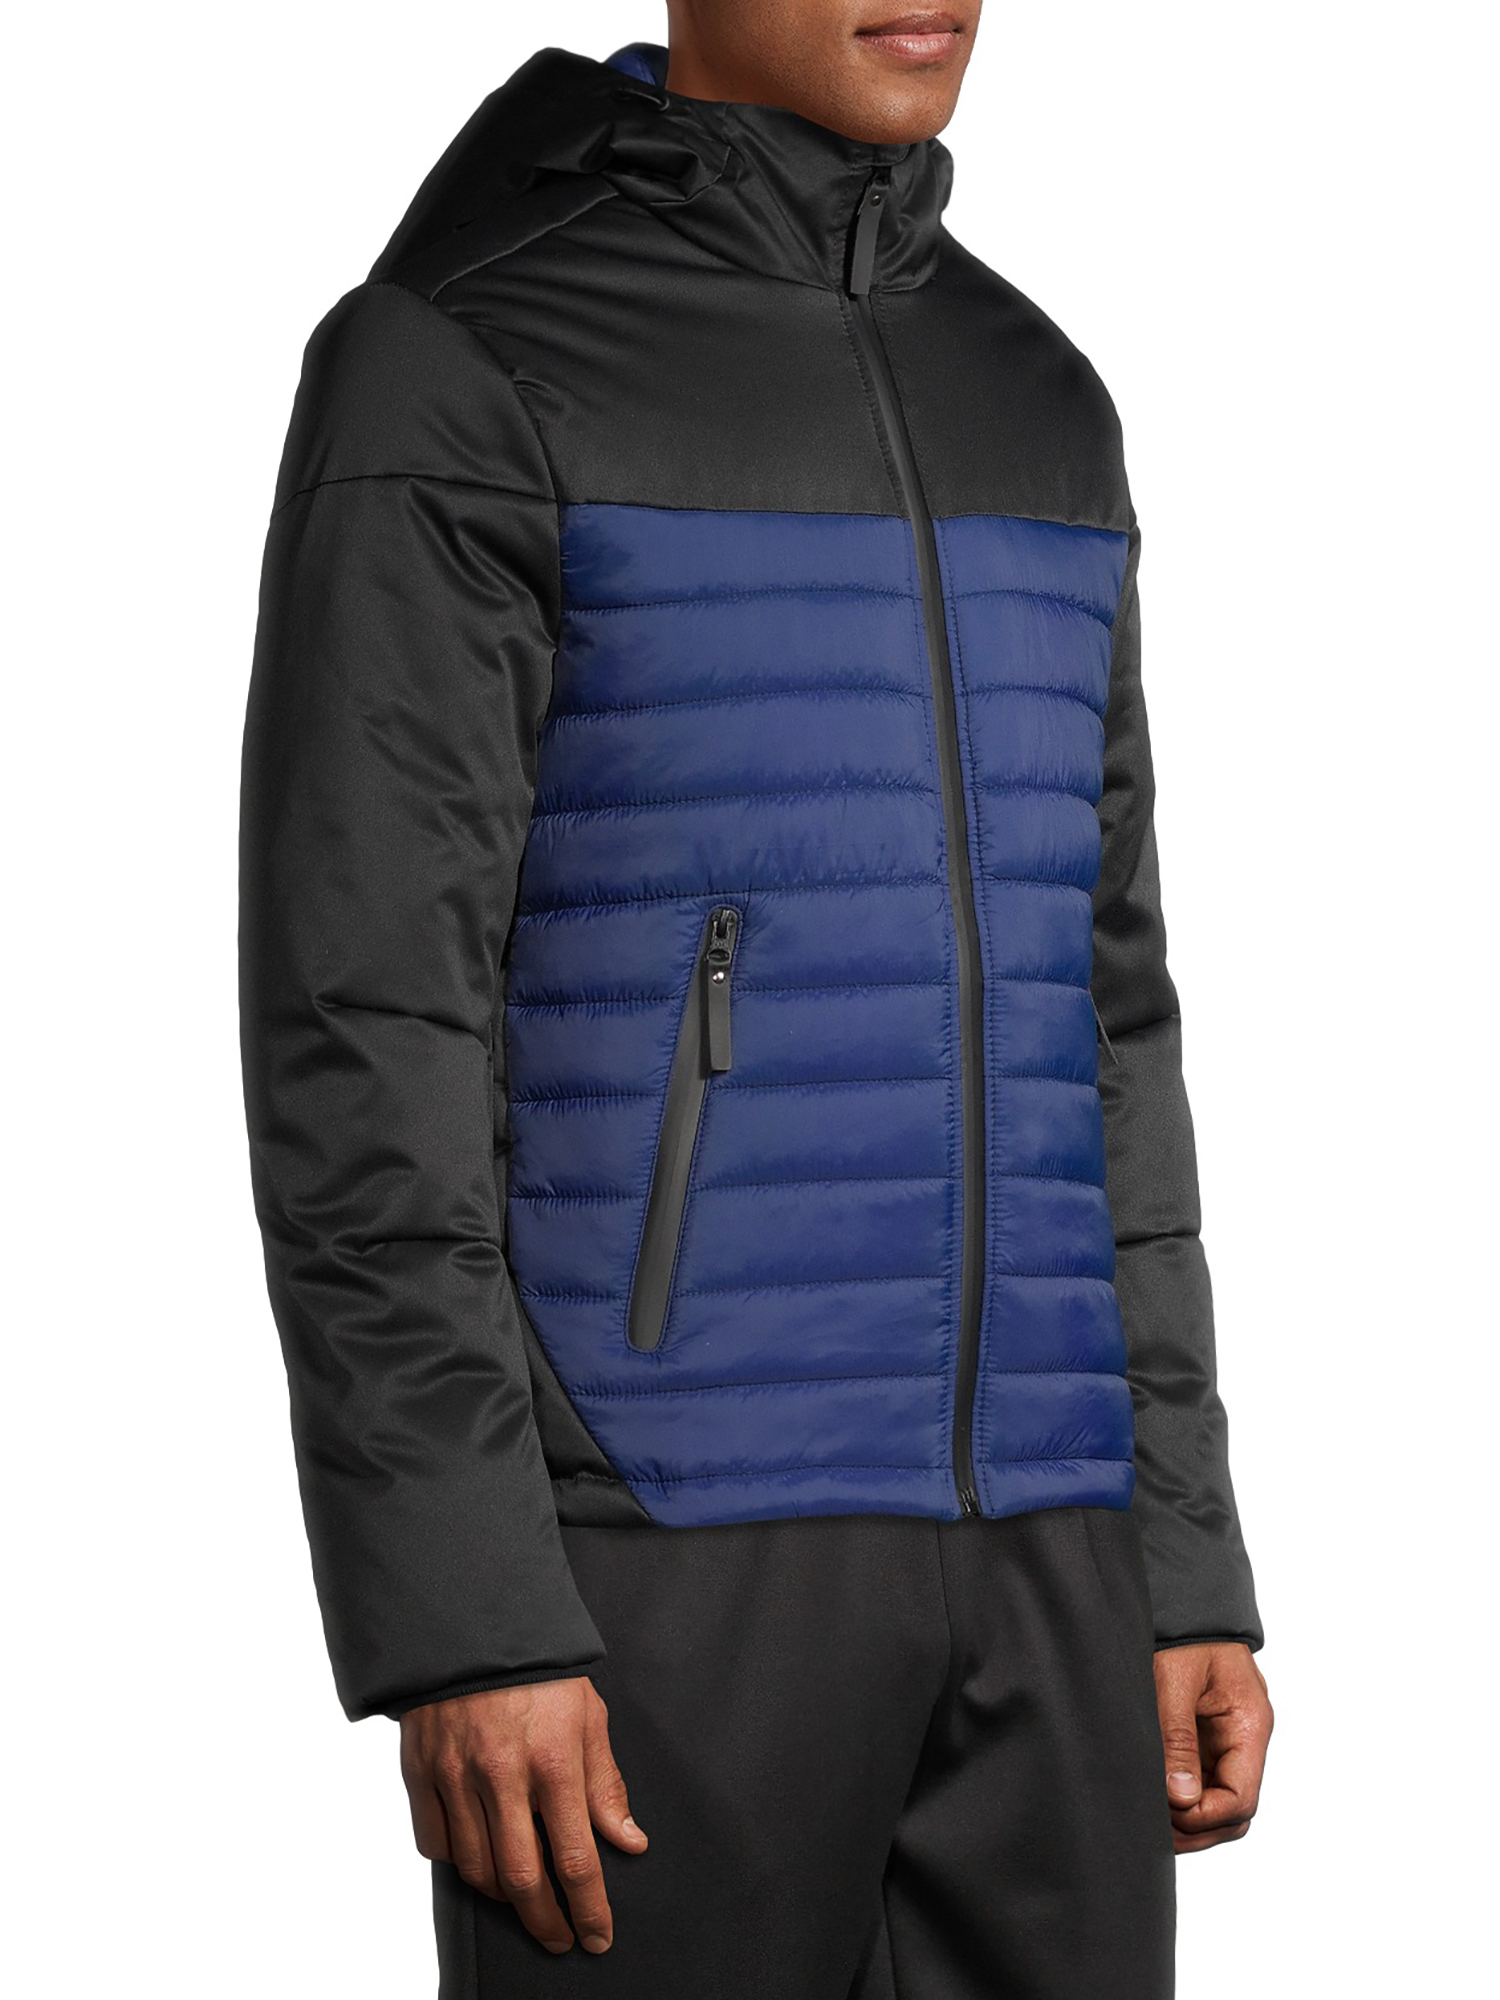 Swiss Tech Men's Hooded Softshell Quilted Mixed Media Jacket - image 3 of 7